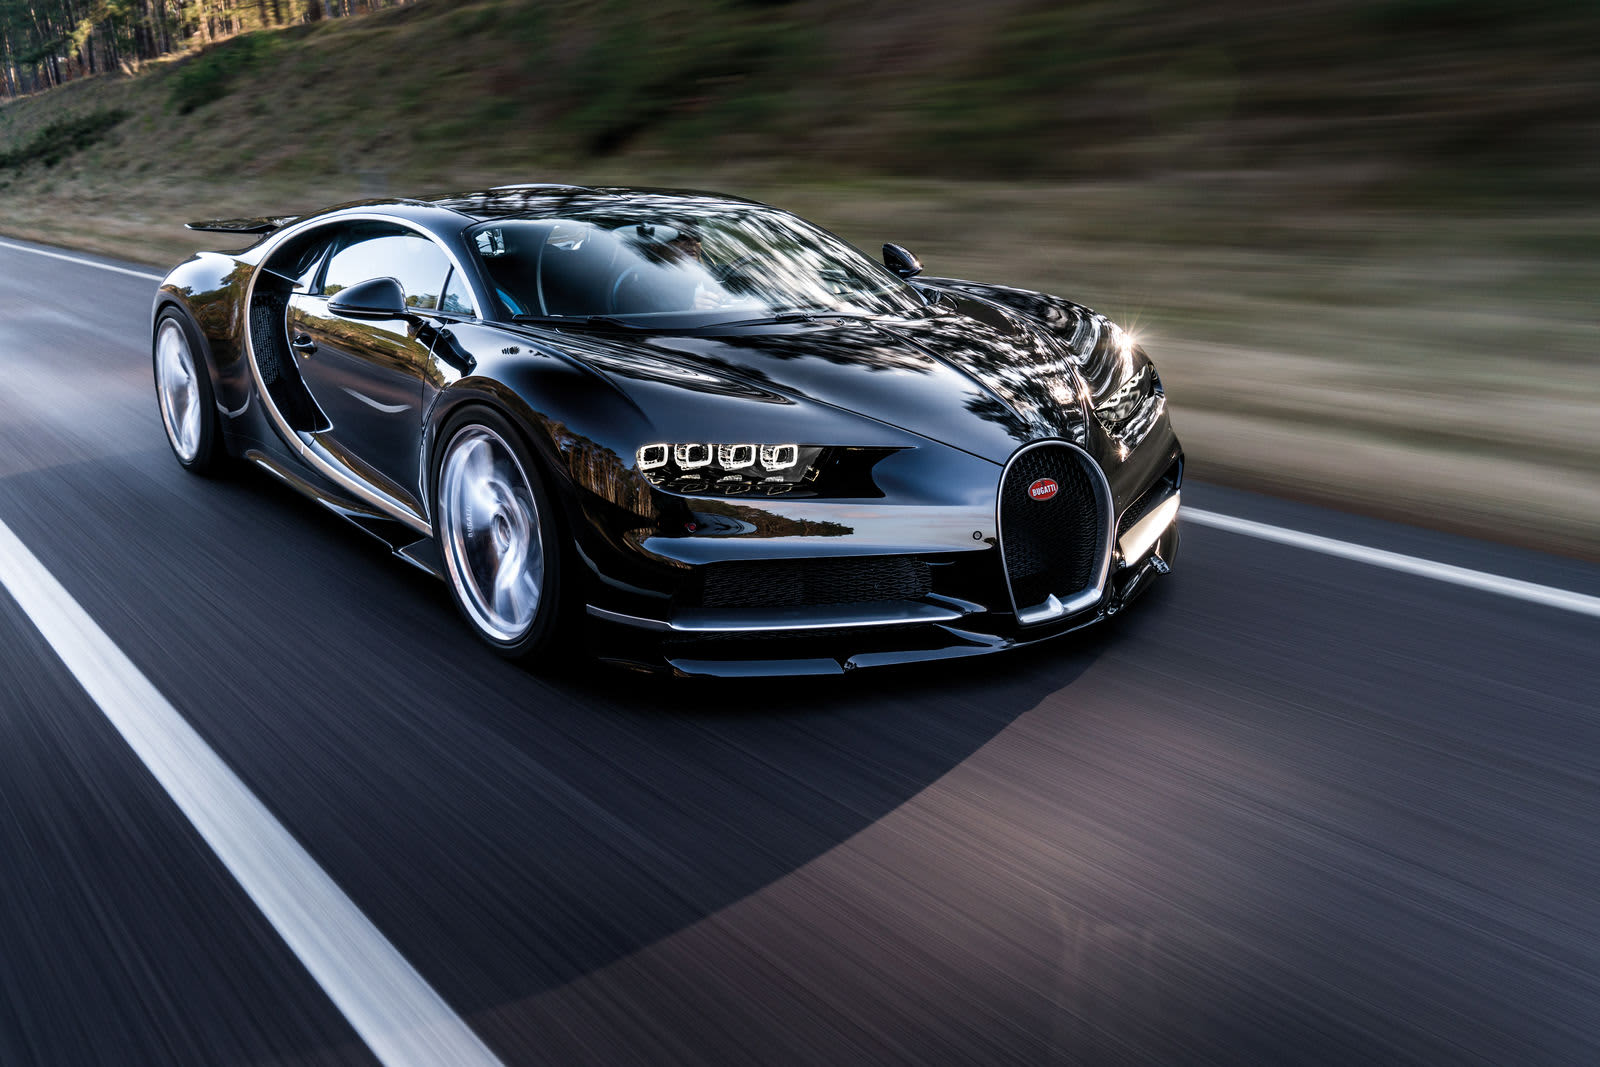 Detail Images Of Bugatti Cars Nomer 21